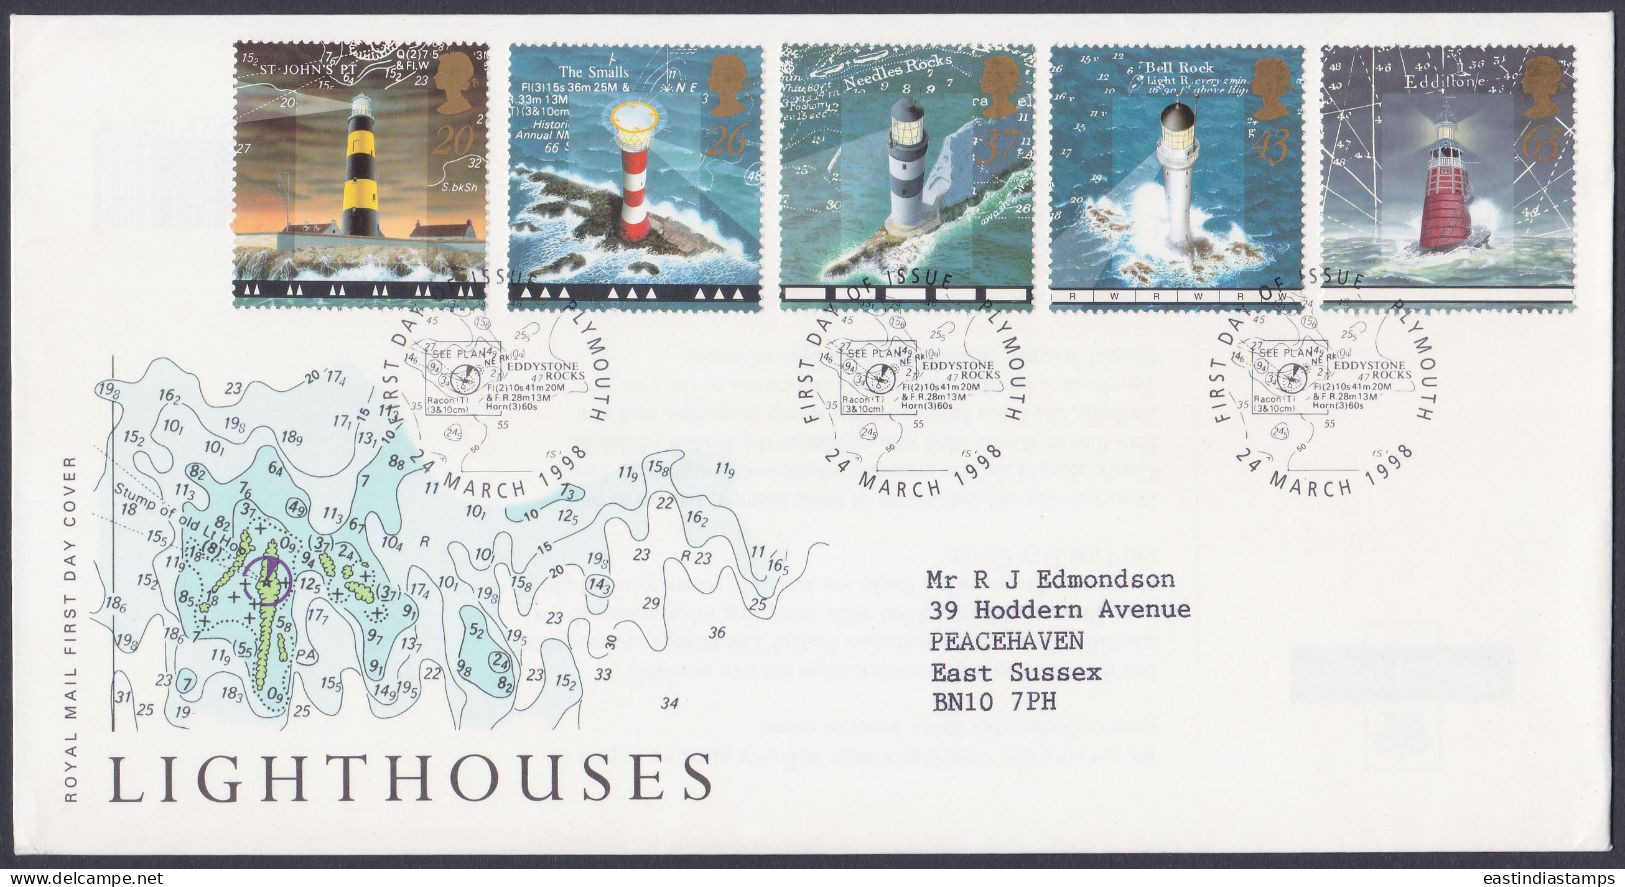 GB Great Britain 1998 FDC Lighthouse, Lighthouses, Coast, Ocean, Pictorial Postmark, First Day Cover - Covers & Documents